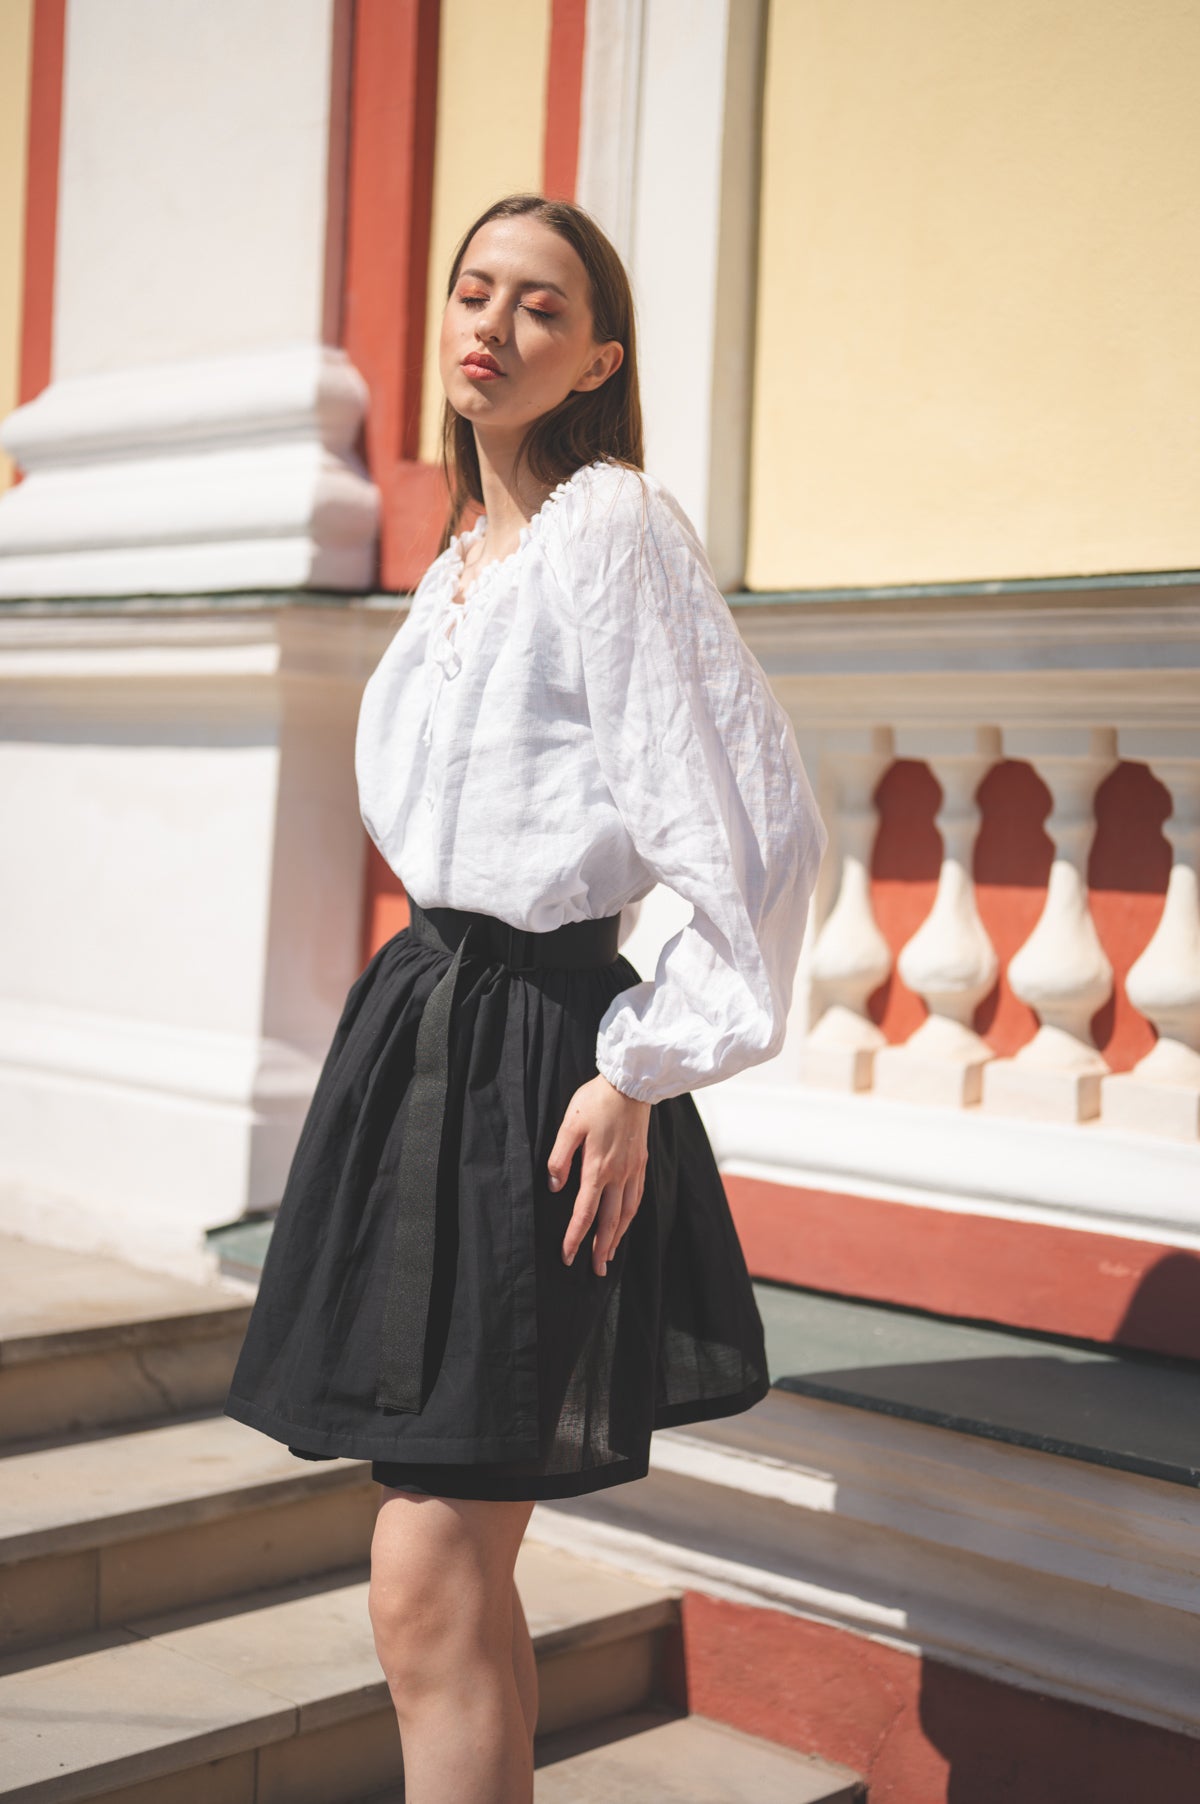 MAI Linen Blouse in White paired with Adele Skirt Mini in Black.